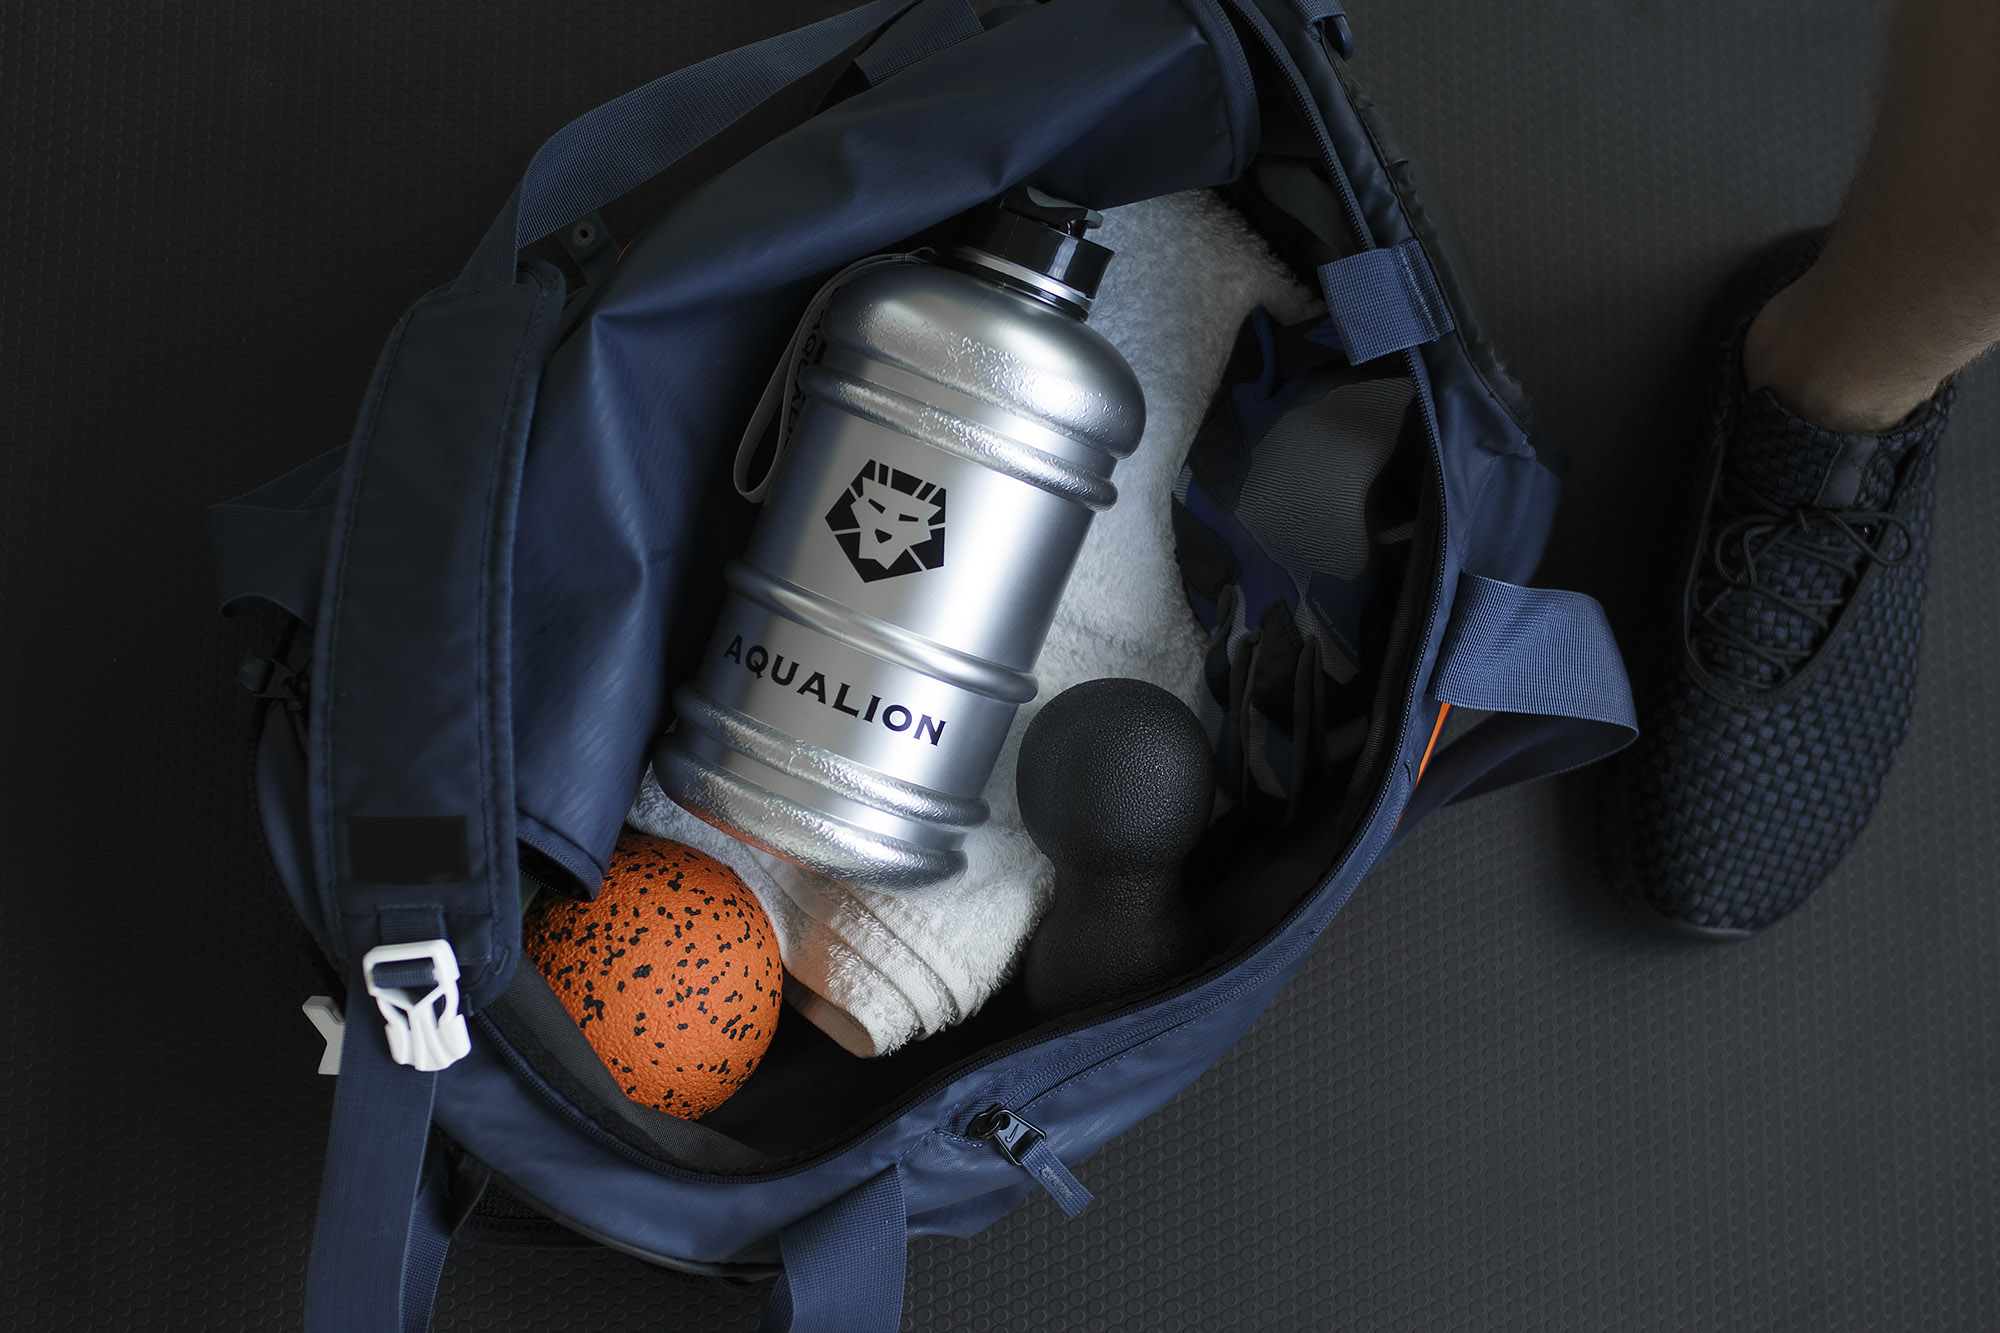 Back with sport equipment and bottle for water